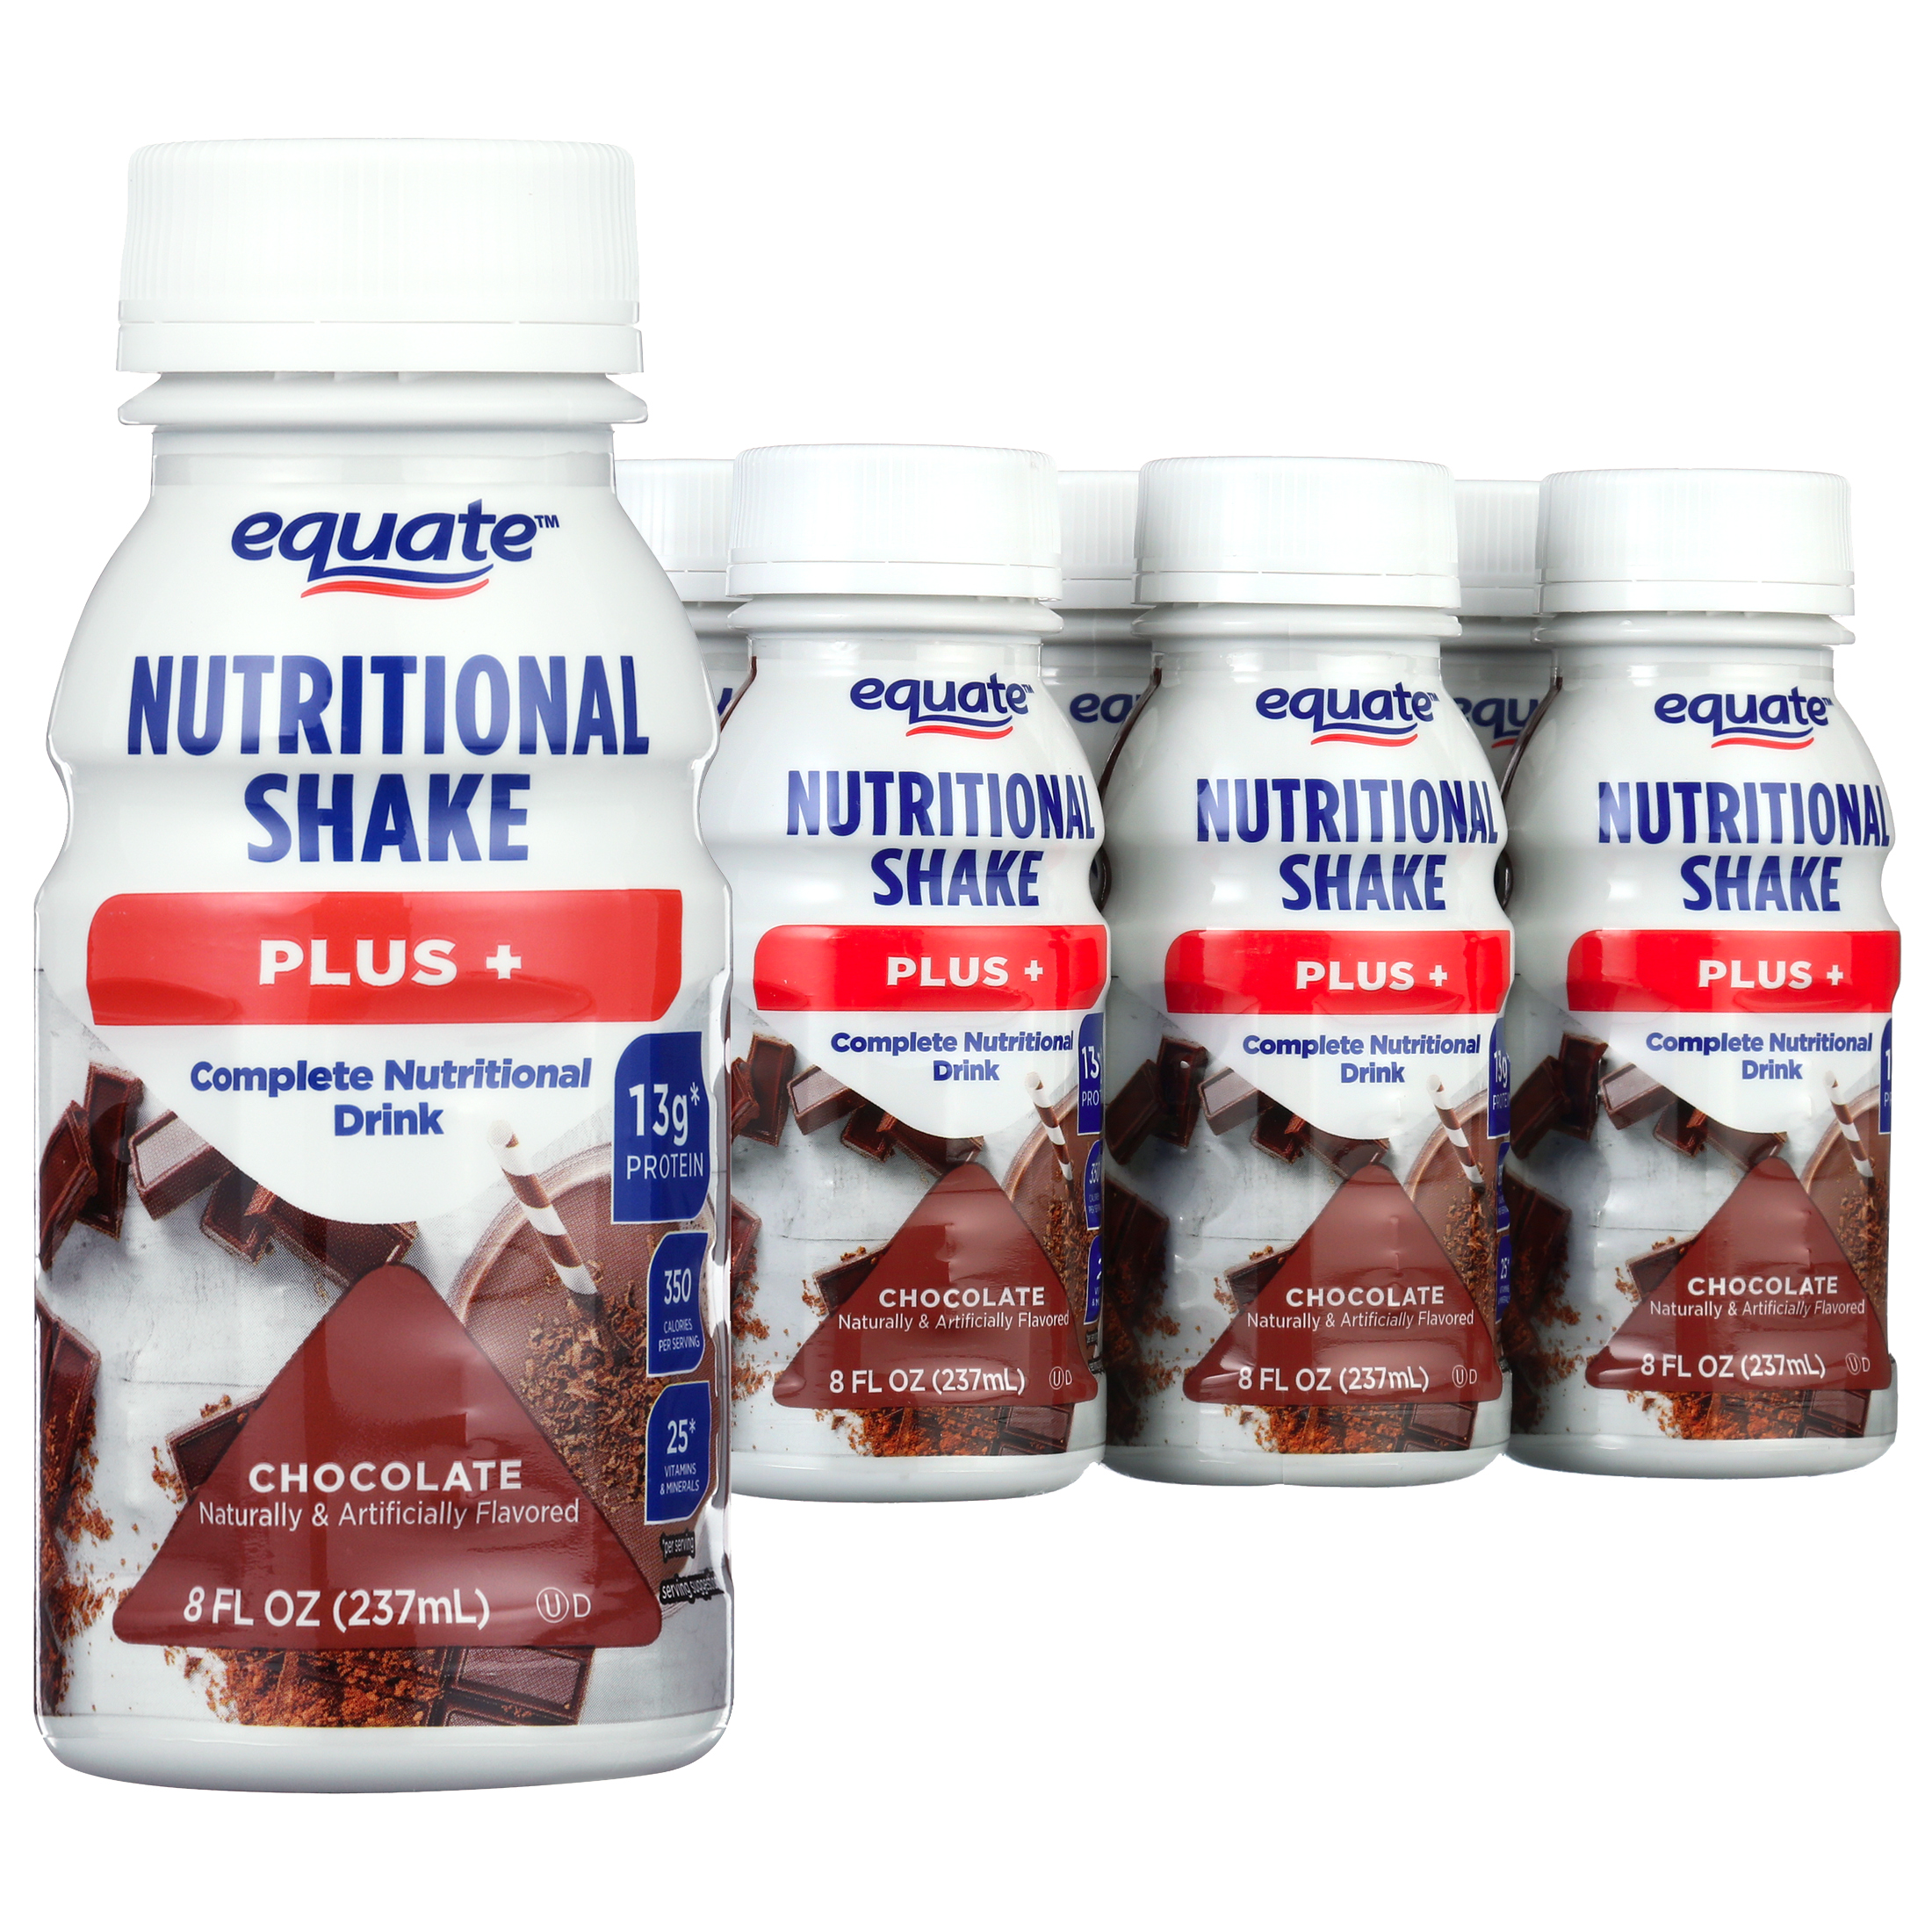 Equate Nutritional Shake Plus, Chocolate, 8 fl oz, 6 Count - image 1 of 10